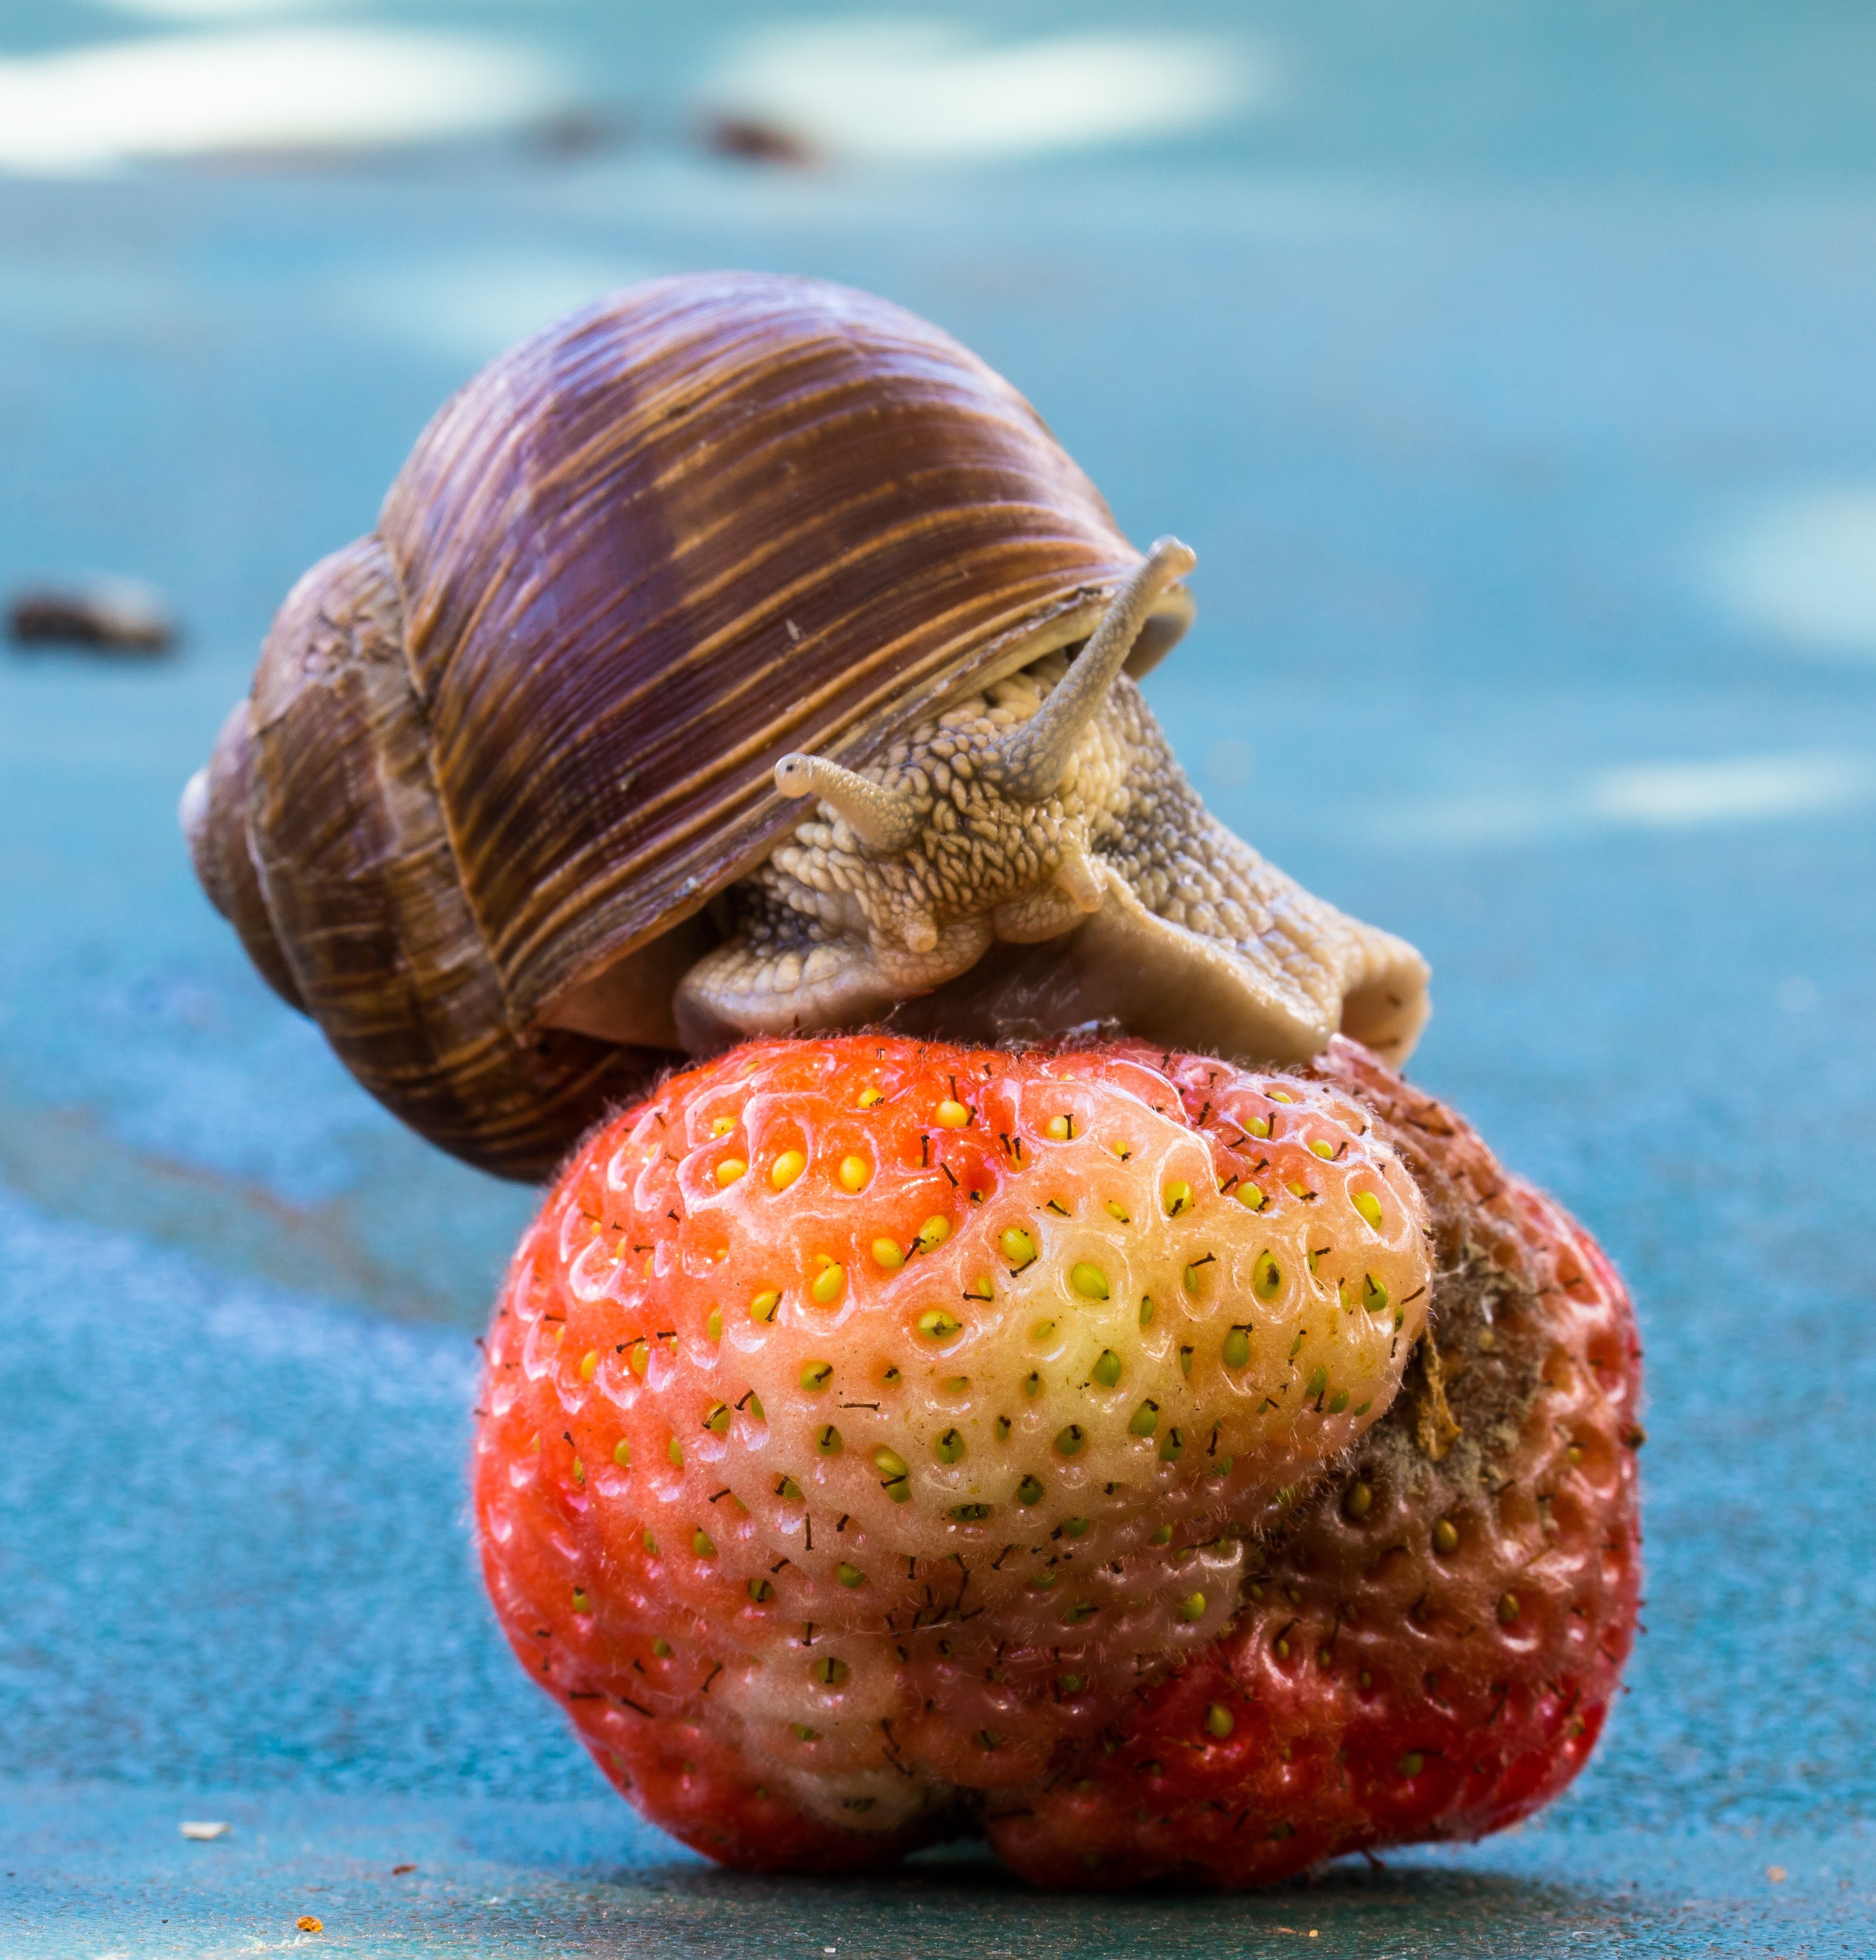 brown snail on red fruits